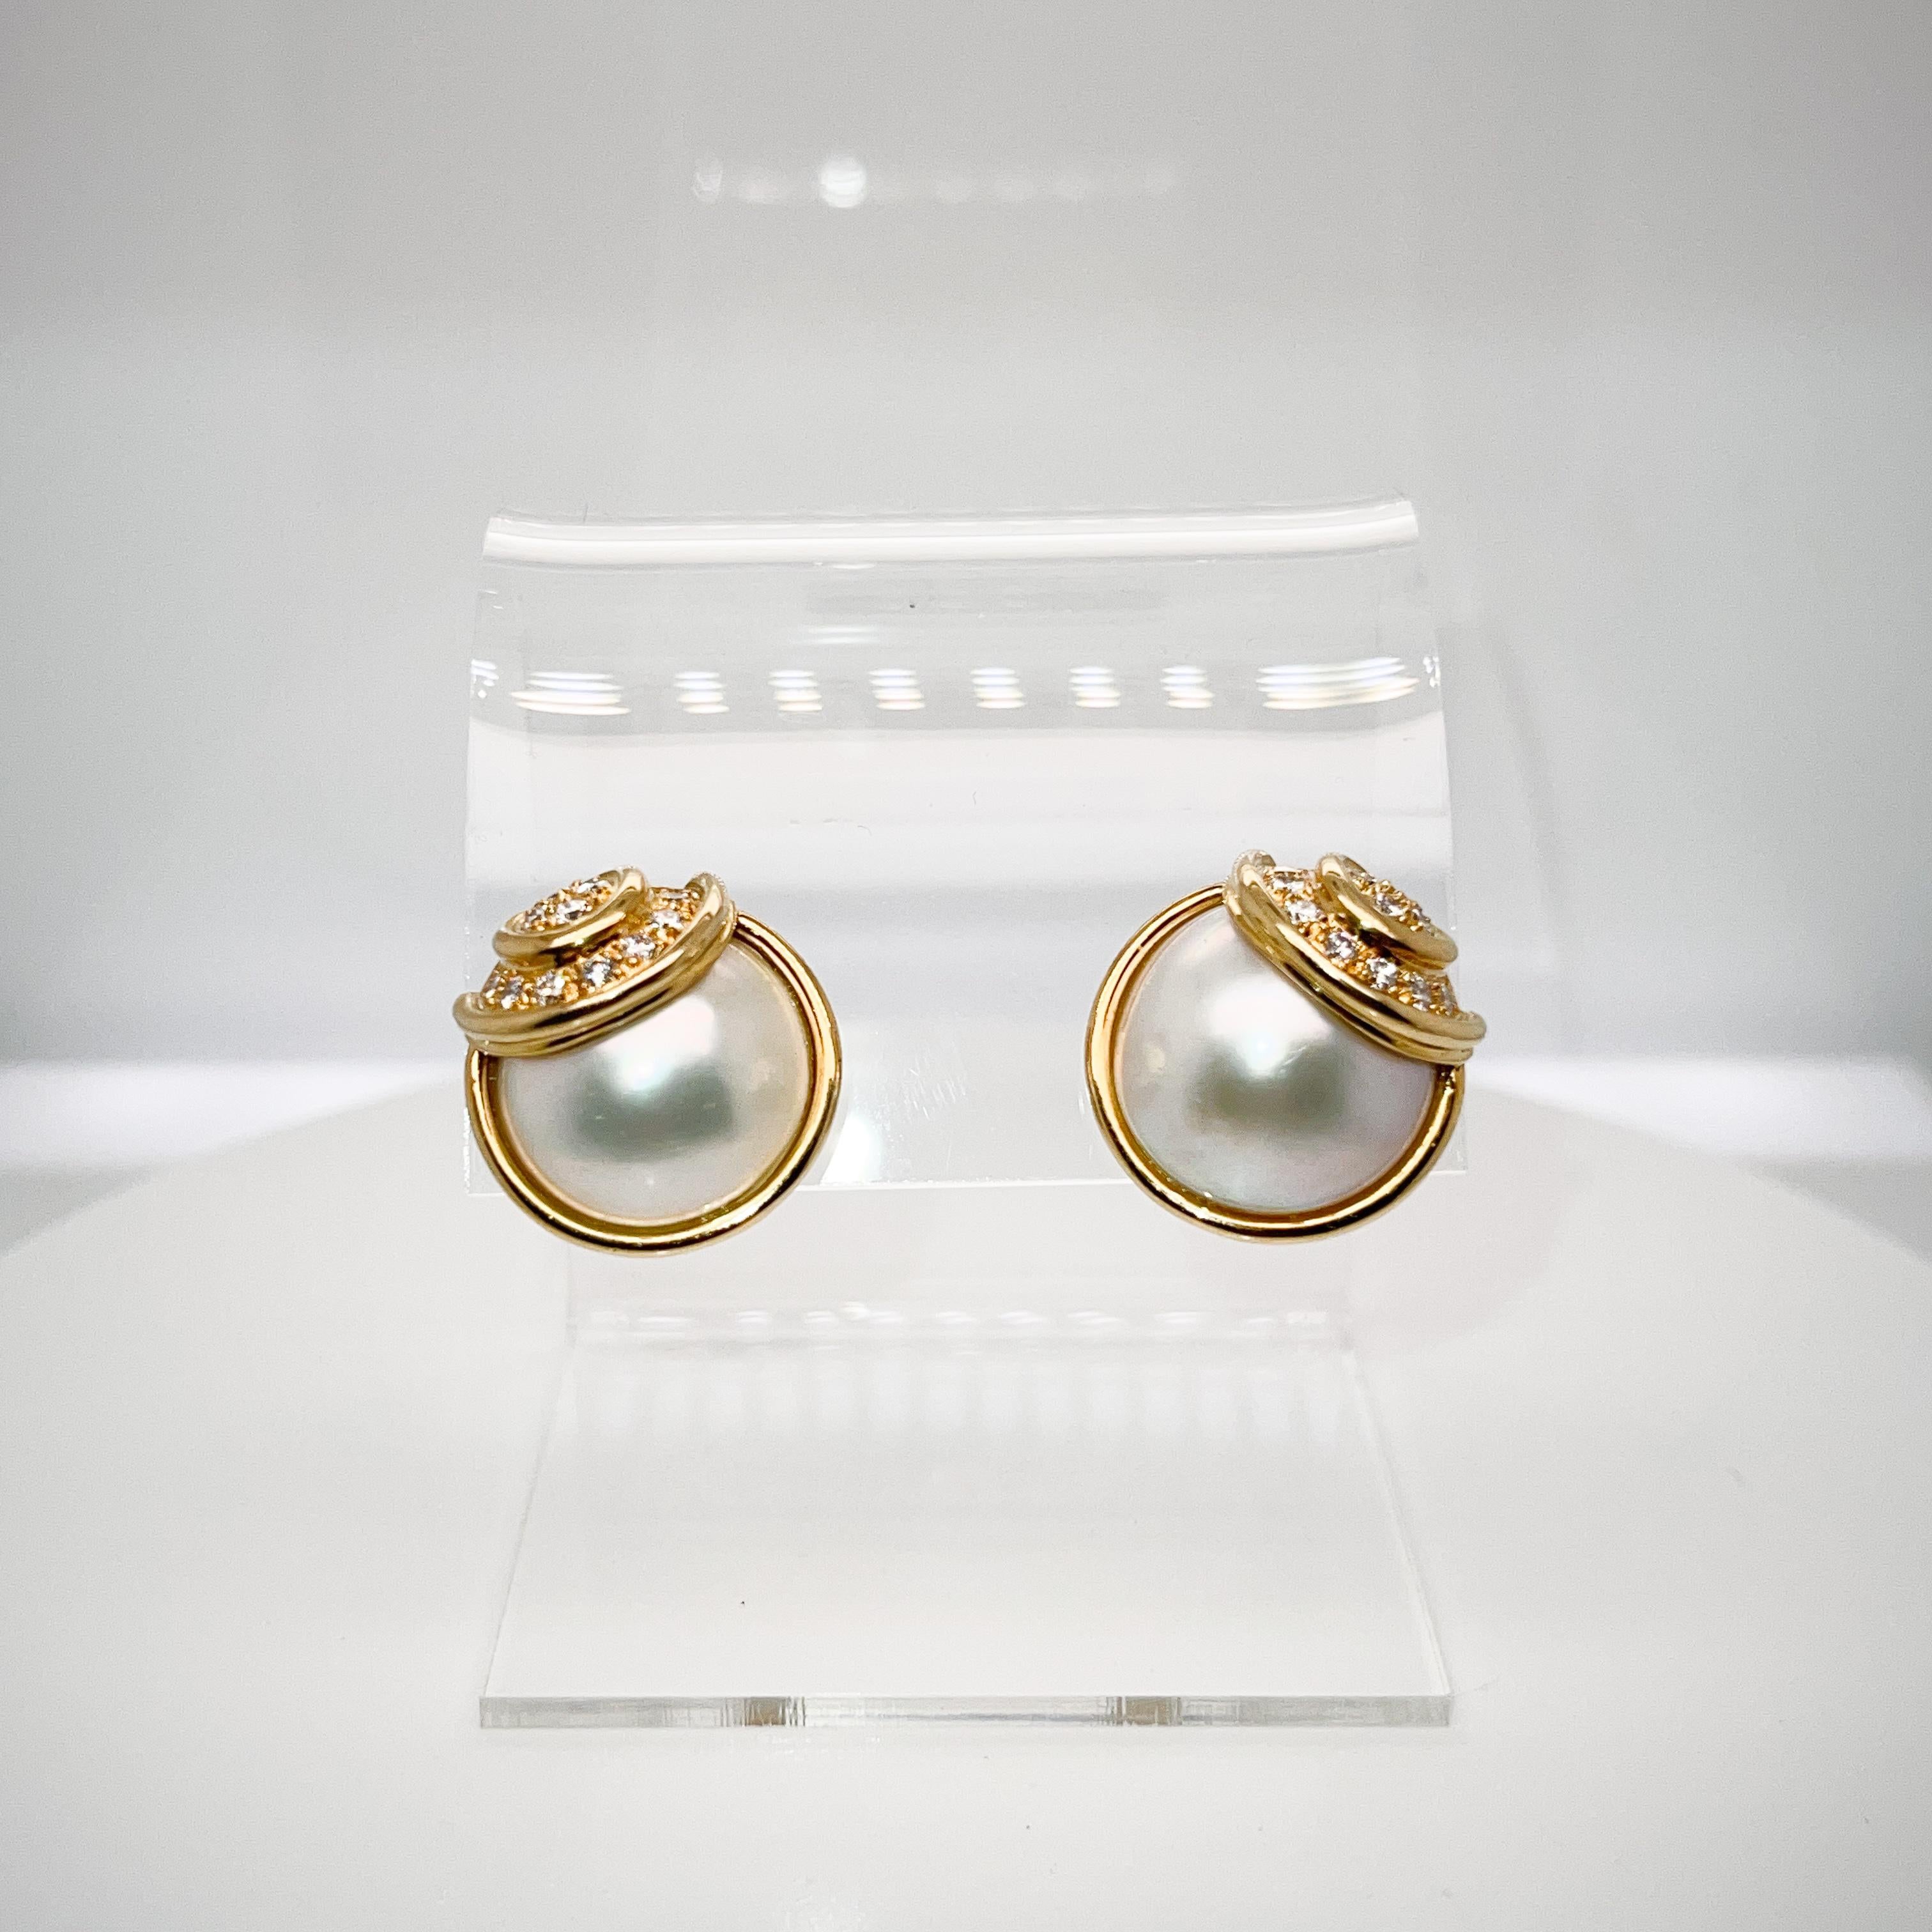 Pair of Signed Gübelin 18K Gold, Diamond & Mabe Pearl Clip-On Earrings For Sale 6